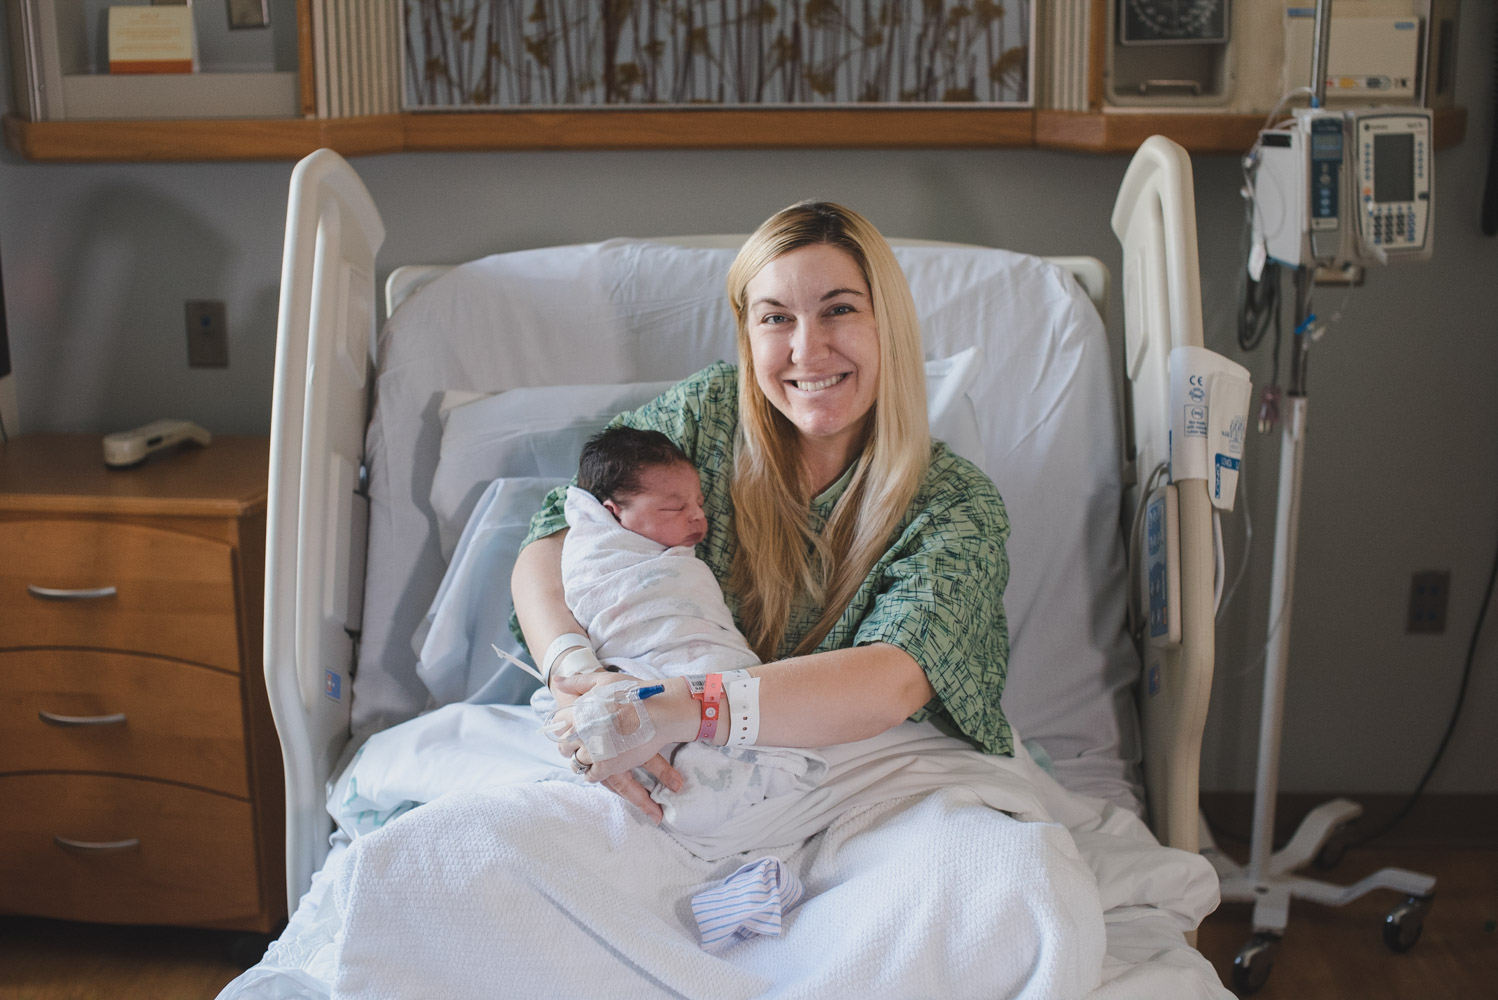 New mother with newborn son in hospital bed.